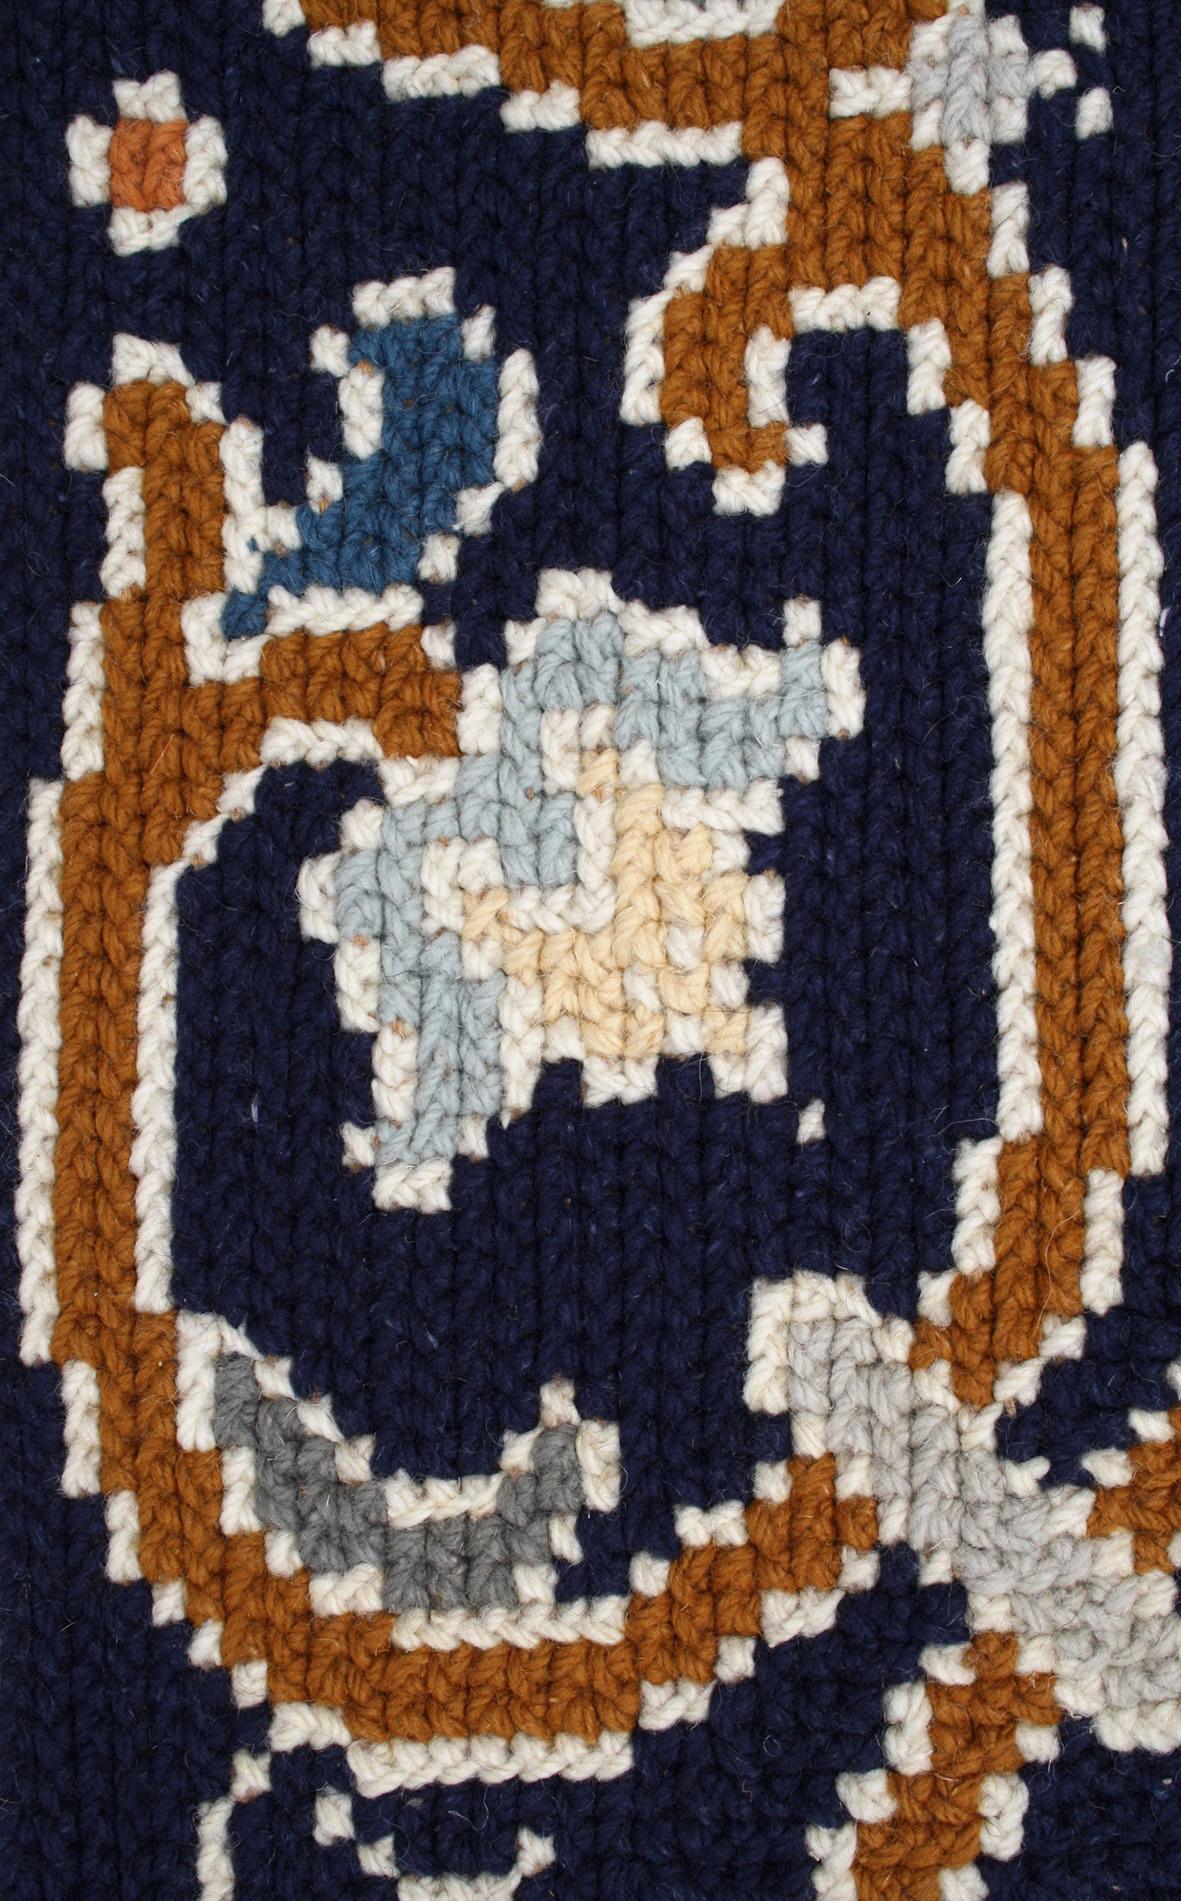 Tapestry XL Floral European Portuguese Needlepoint Embroidered Arraiolos Rug Cream & Blue For Sale